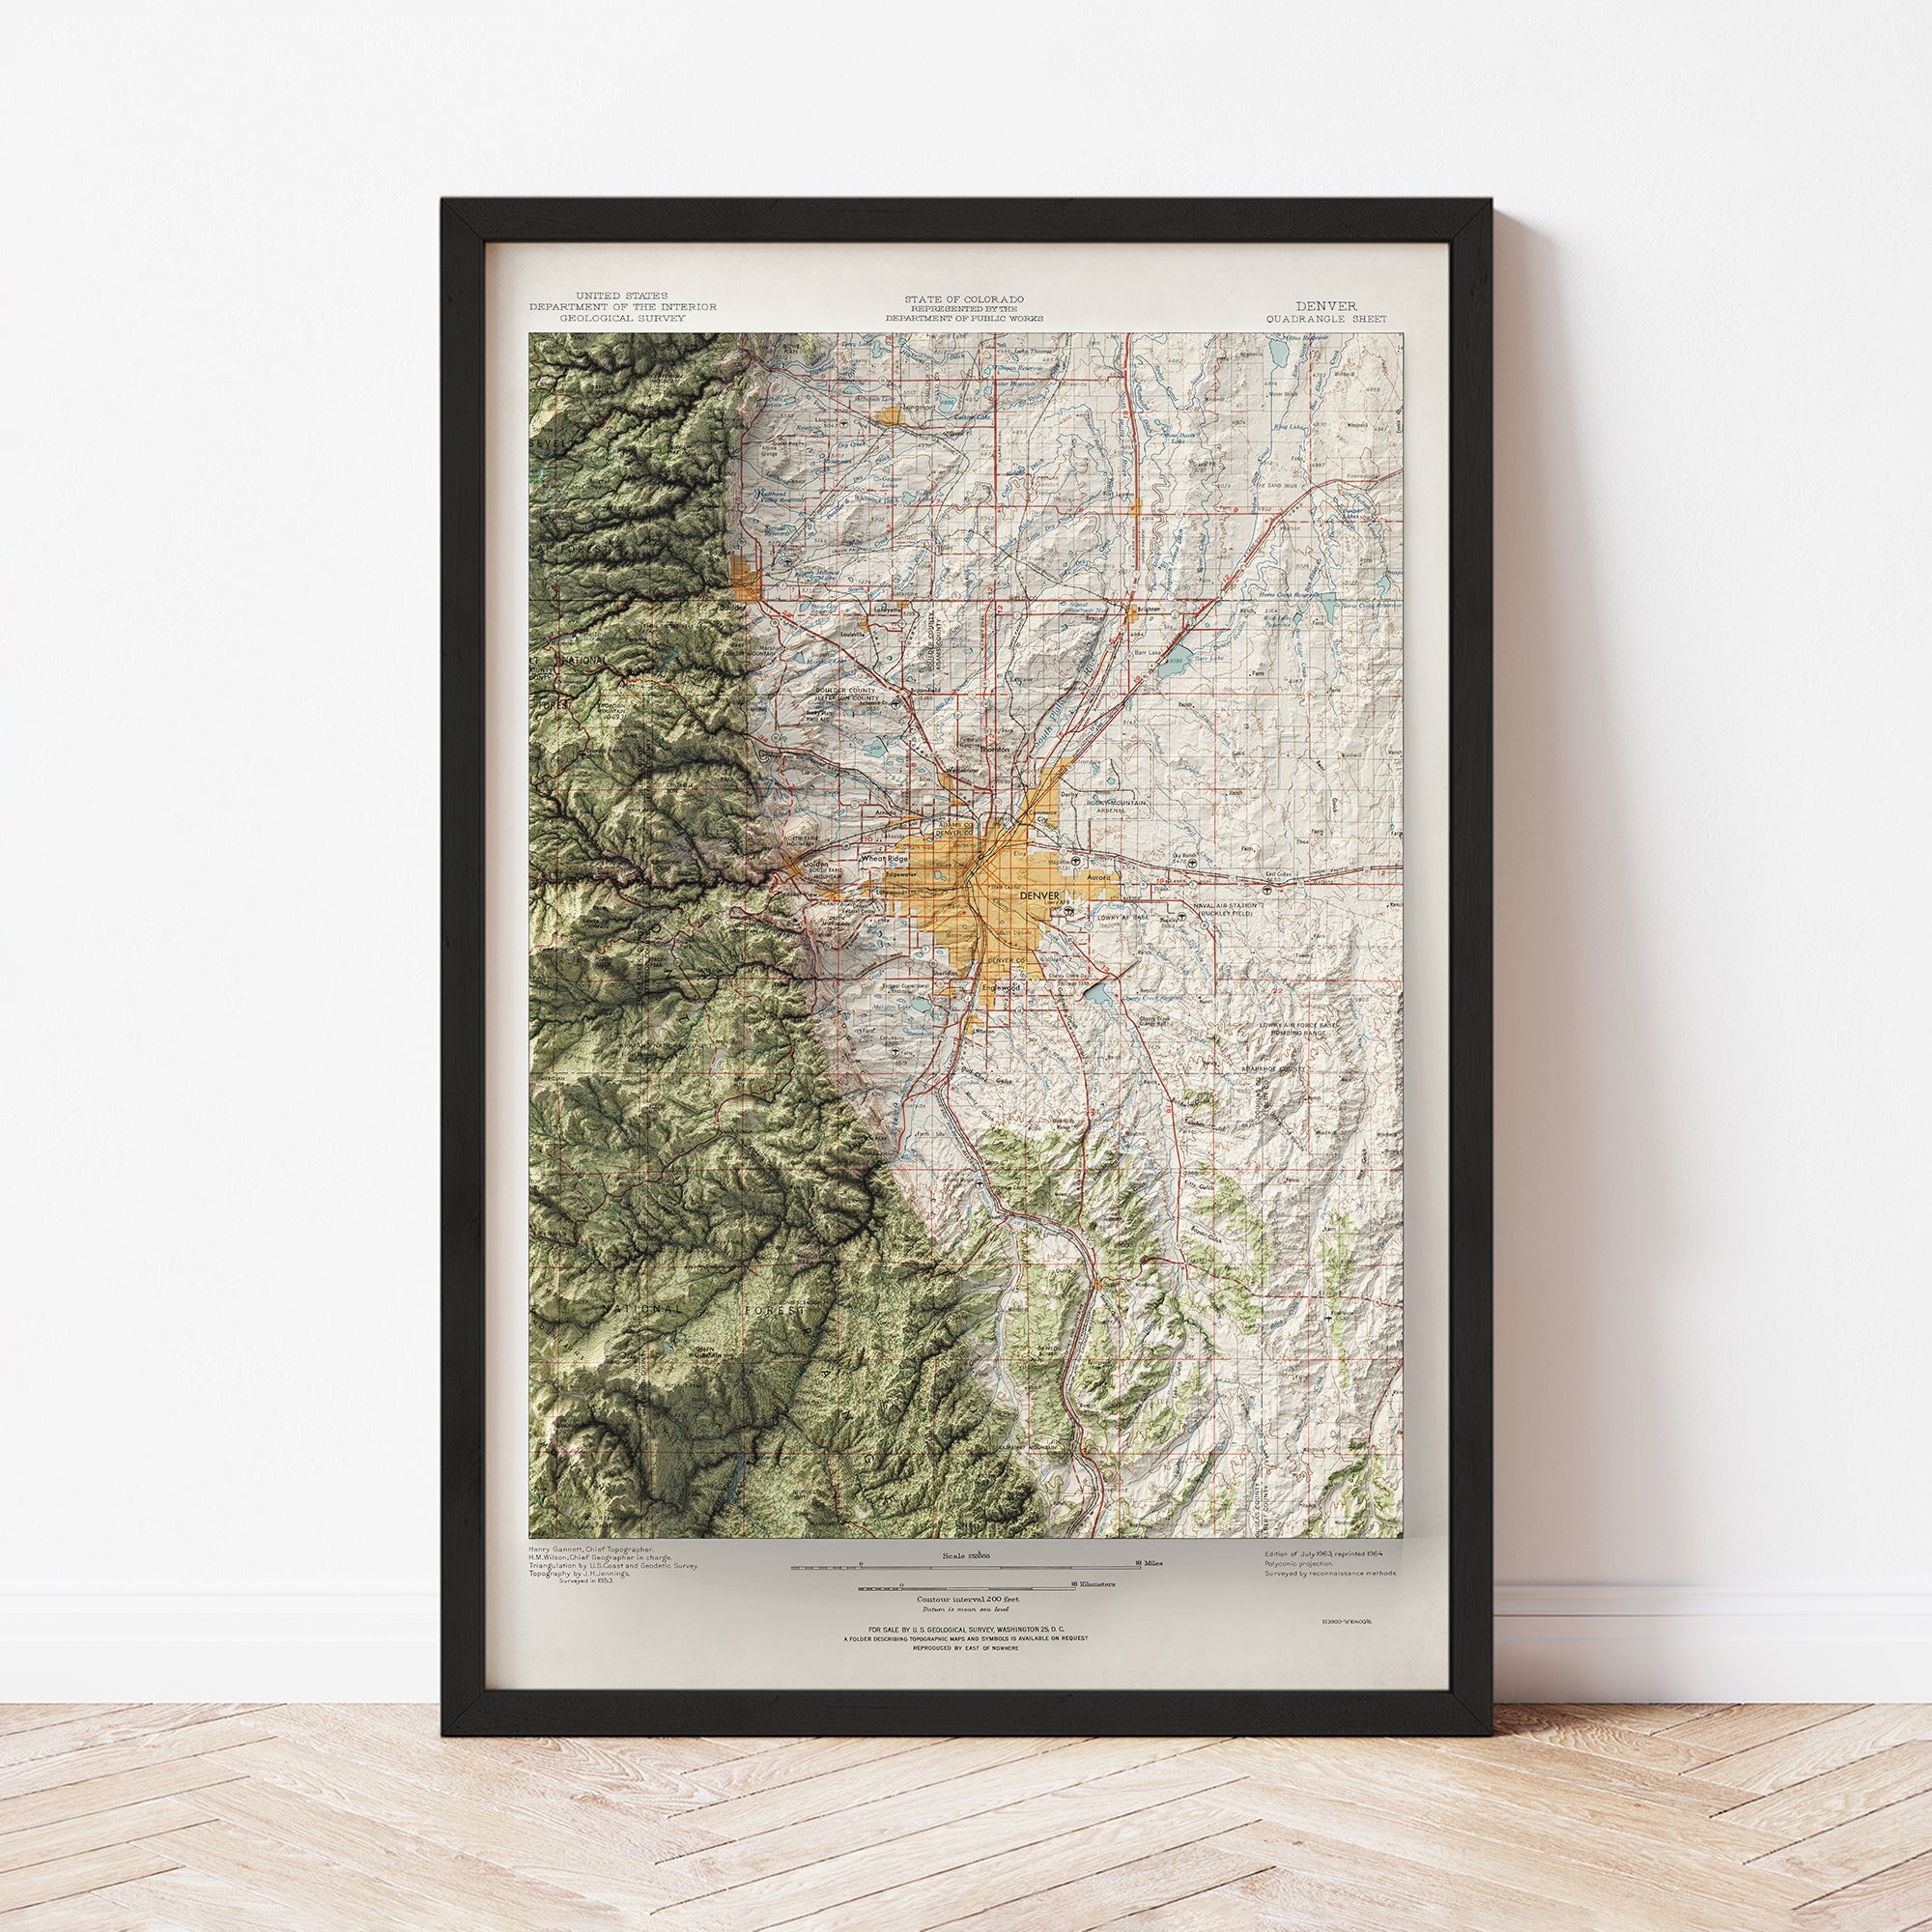 Denver, CO - Vintage Shaded Relief Map (1963)